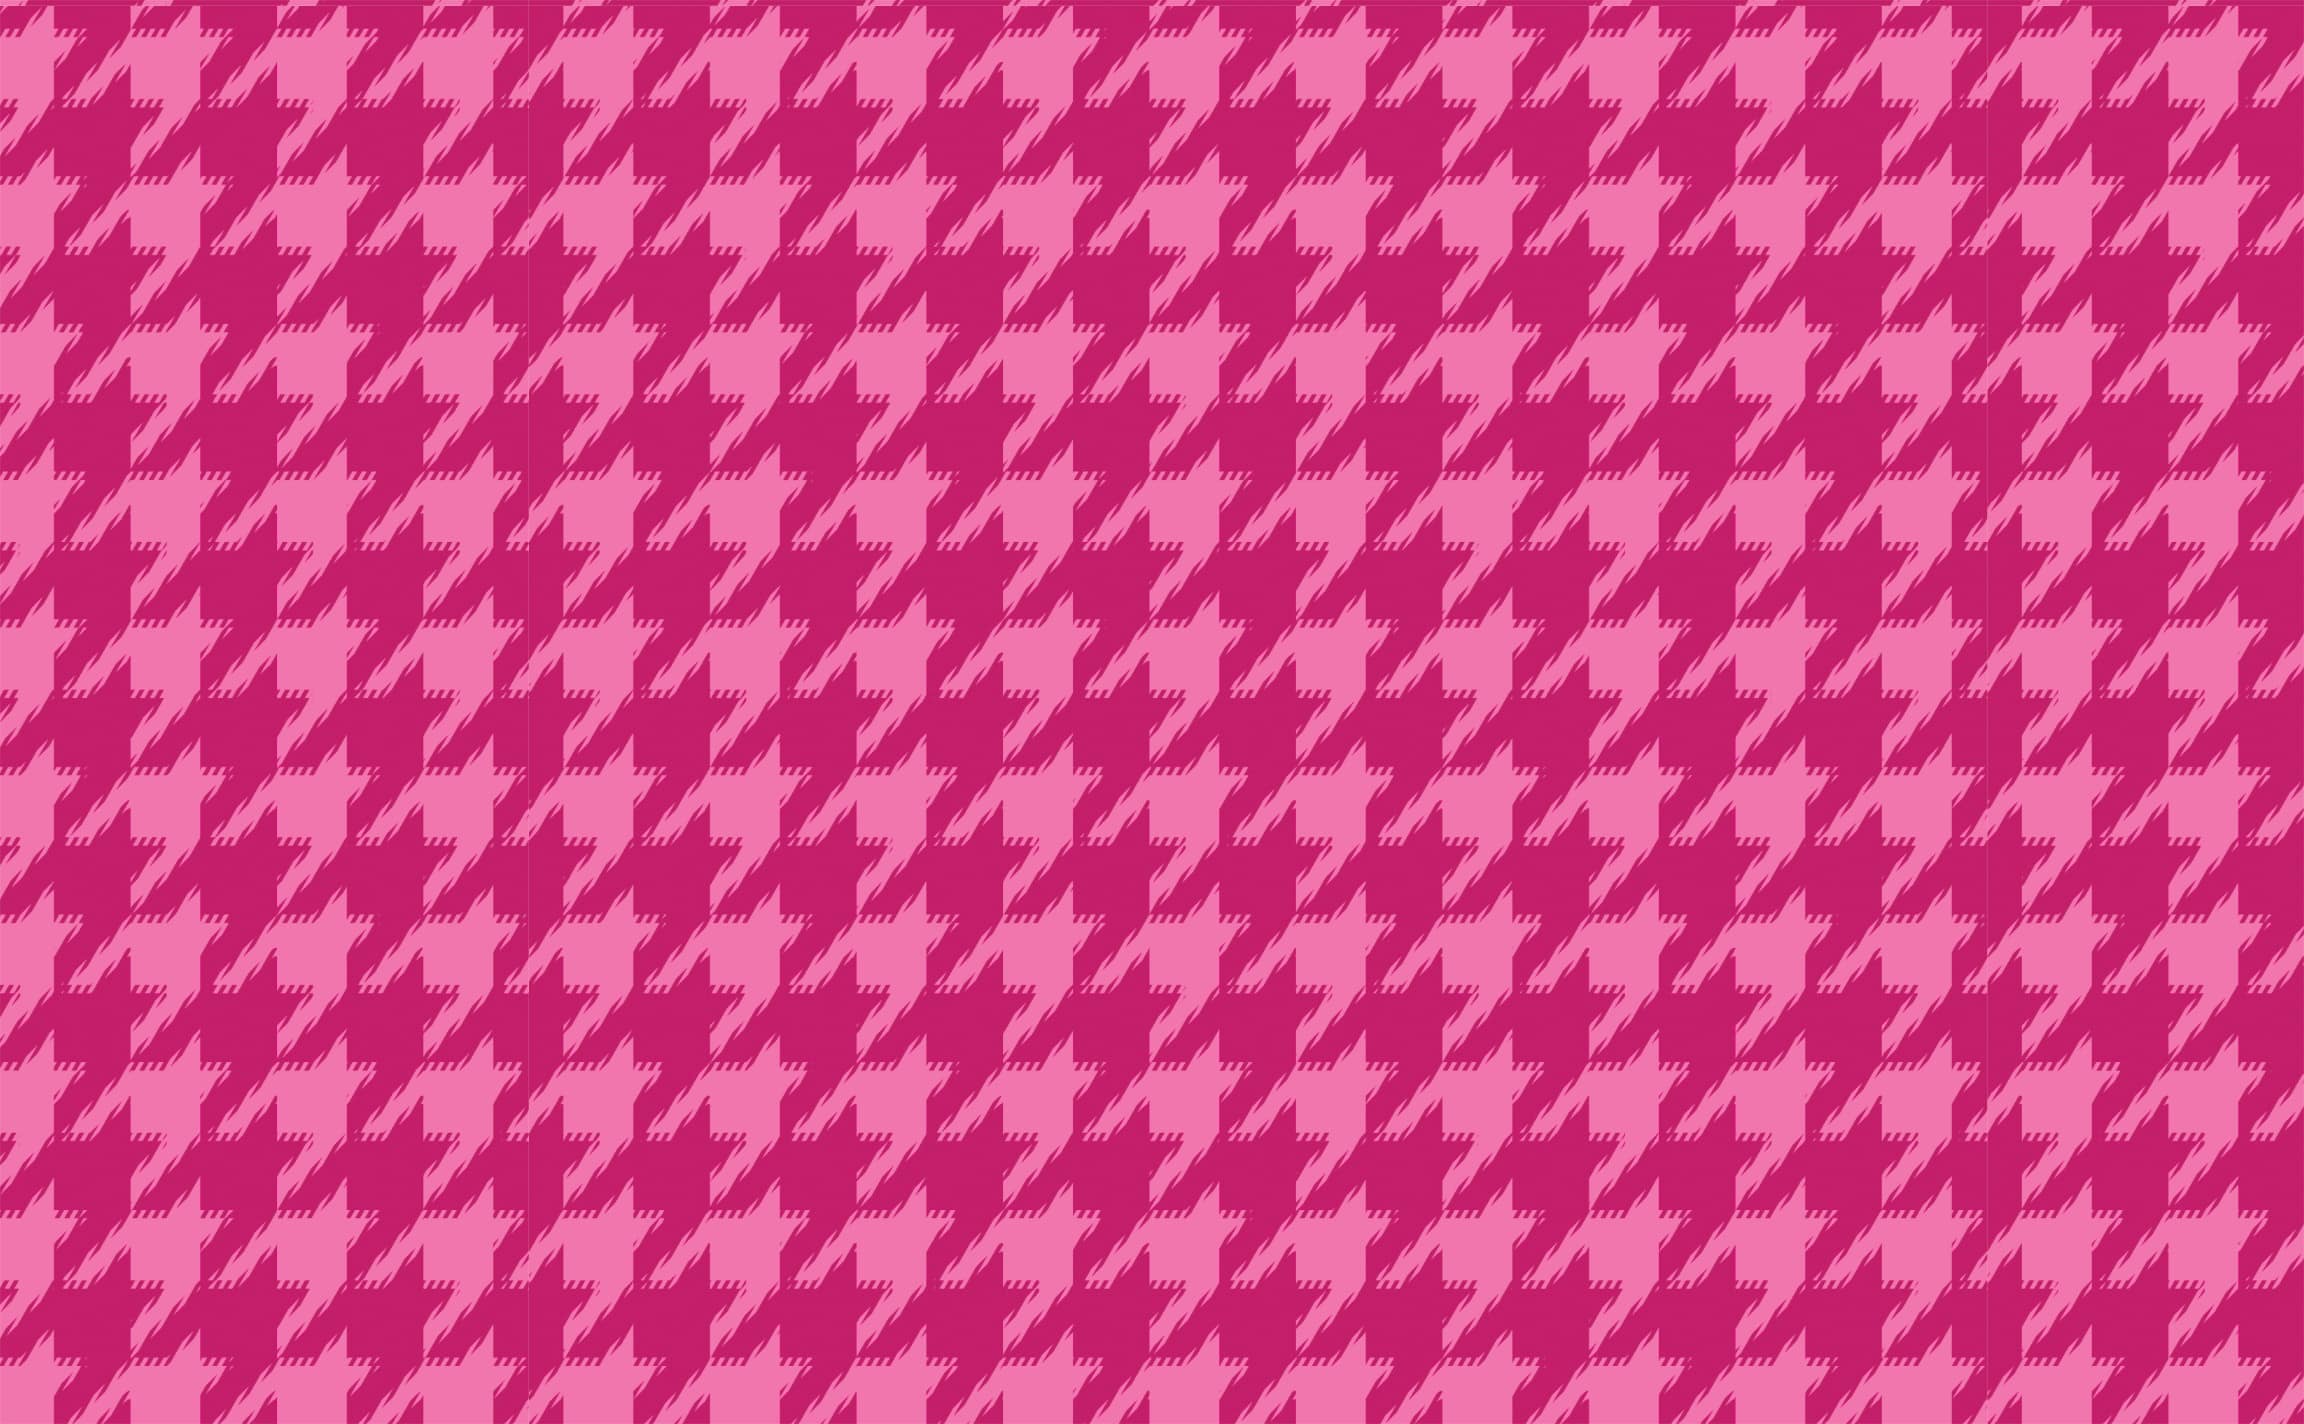 Groovy Houndstooth in Fuchsia